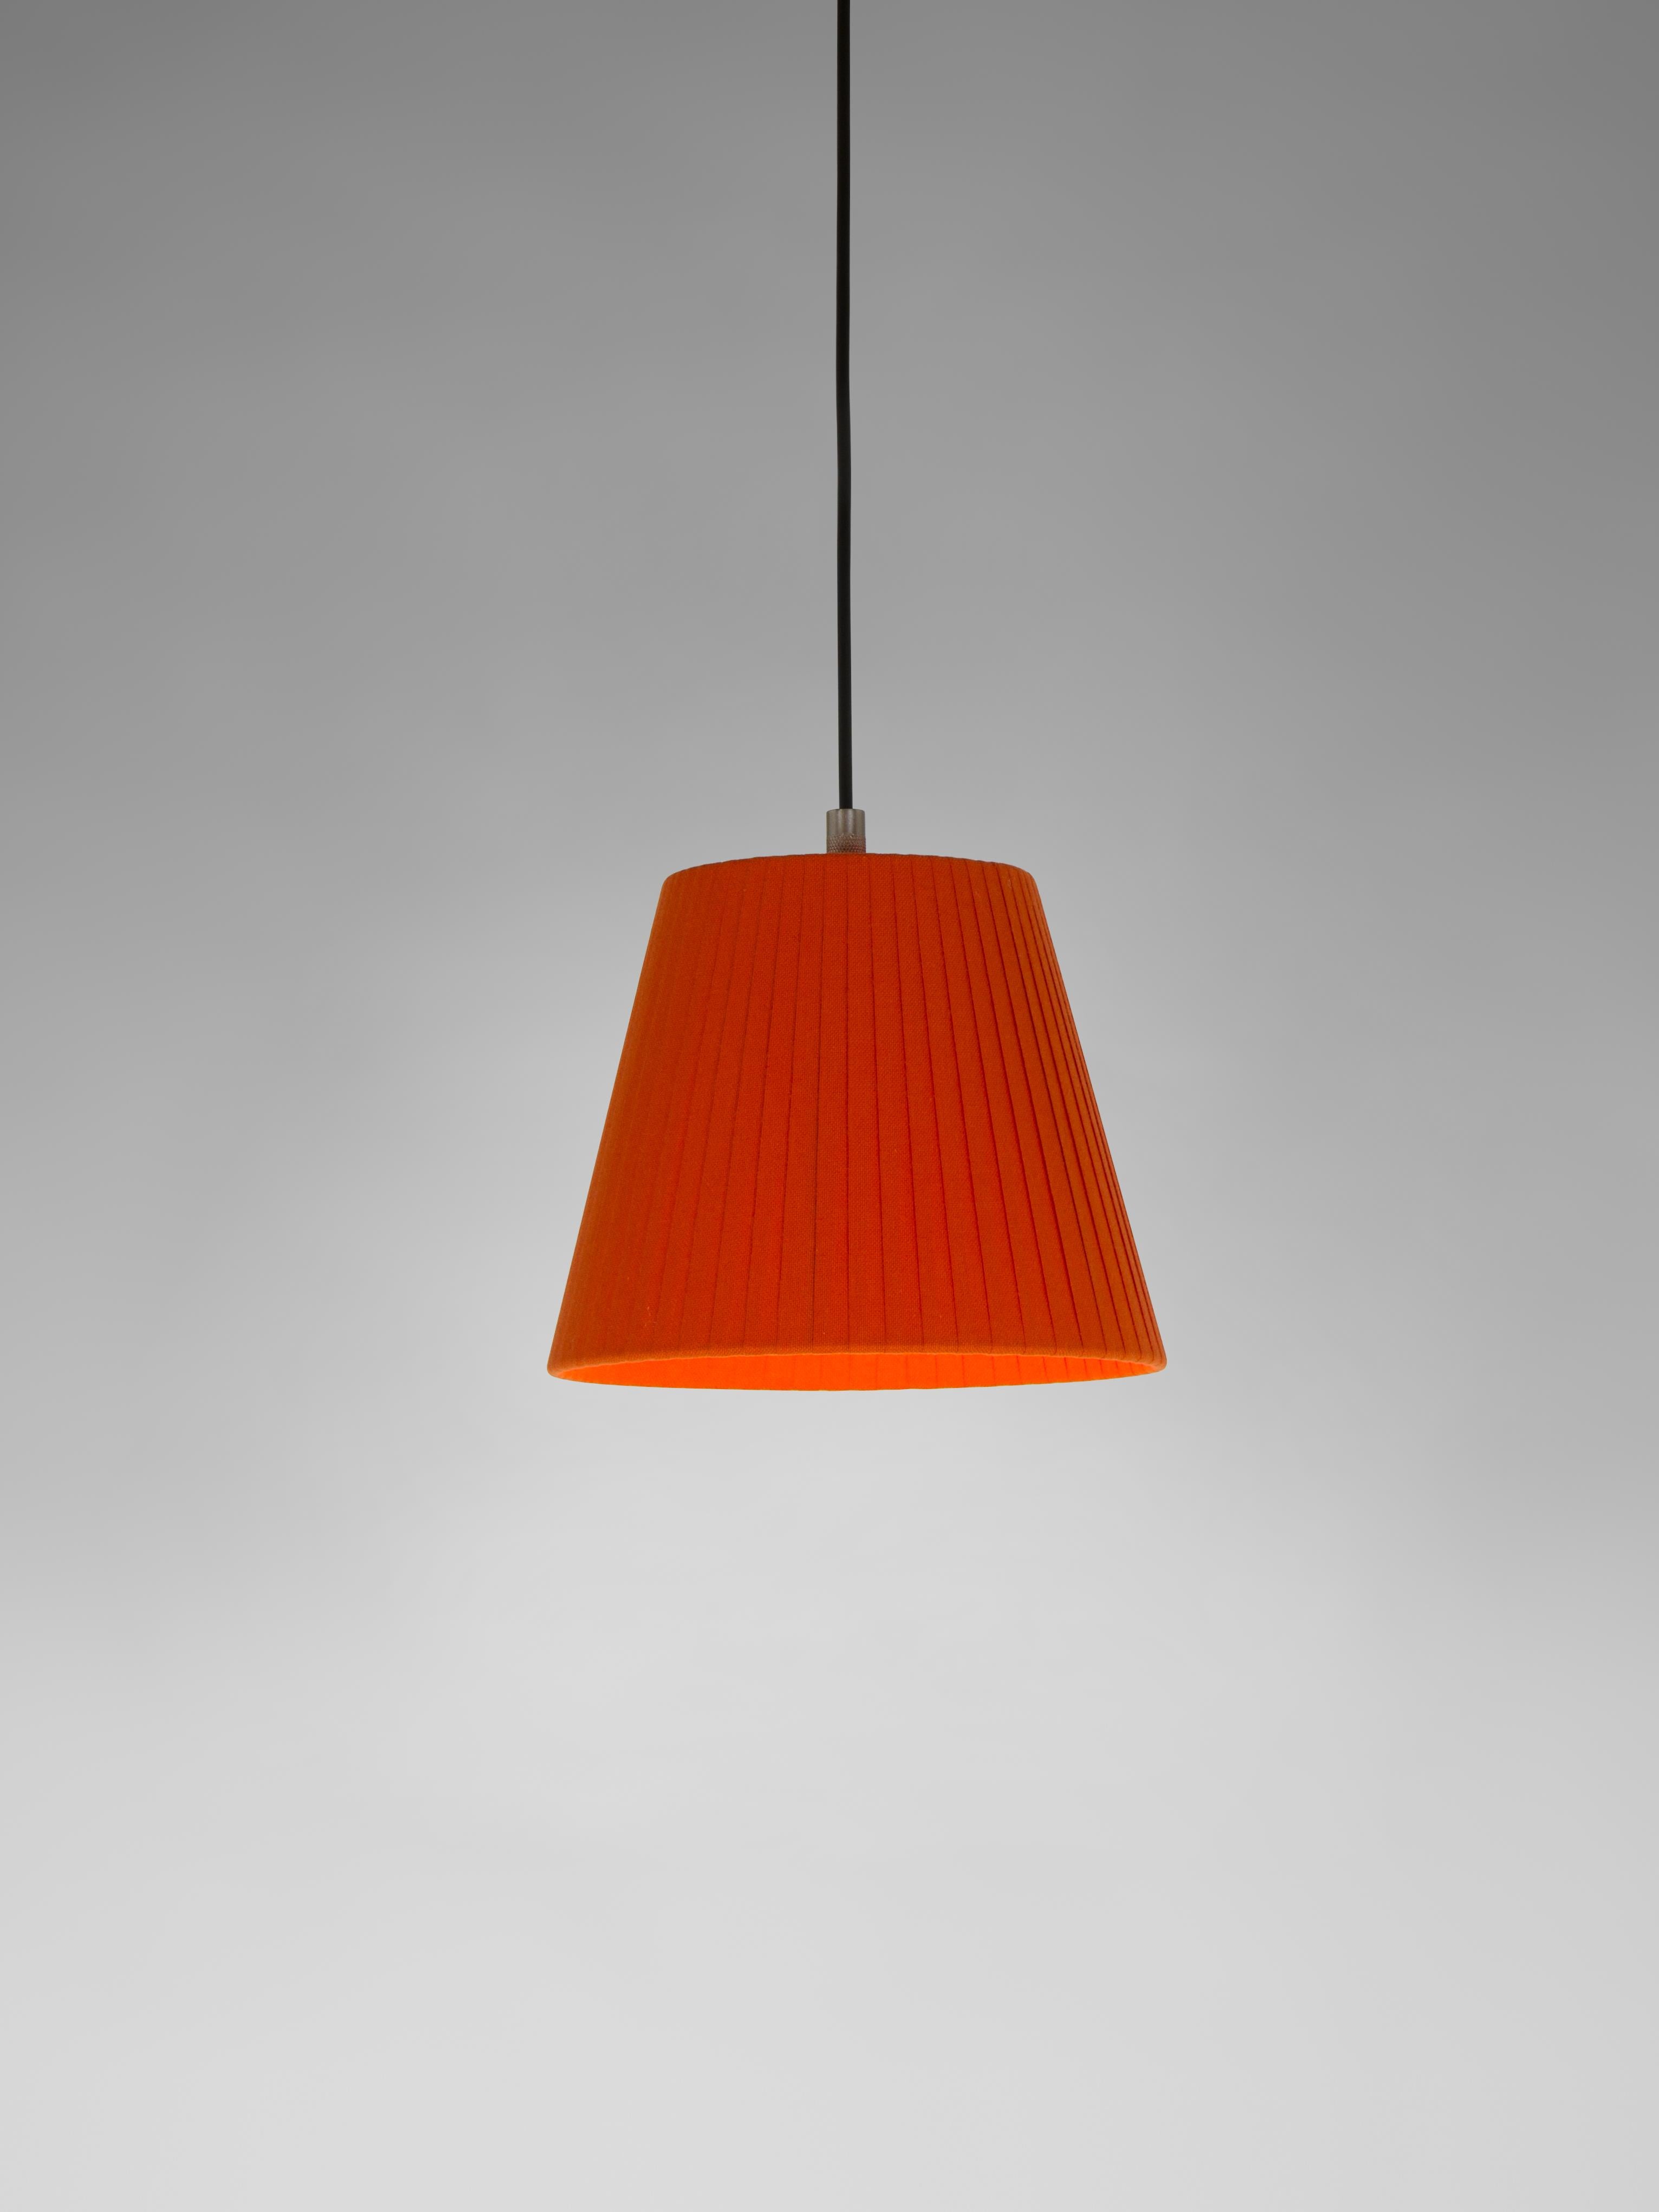 Red sísísí cónicas PT1 pendant lamp by Santa & Cole
Dimensions: D 20 x H 16 cm
Materials: Metal, ribbon.
Available in other colors.

The conical shape group has multiple finishes and sizes. It consists of four sizes: PT1, MT1, GT1 and GT3, and